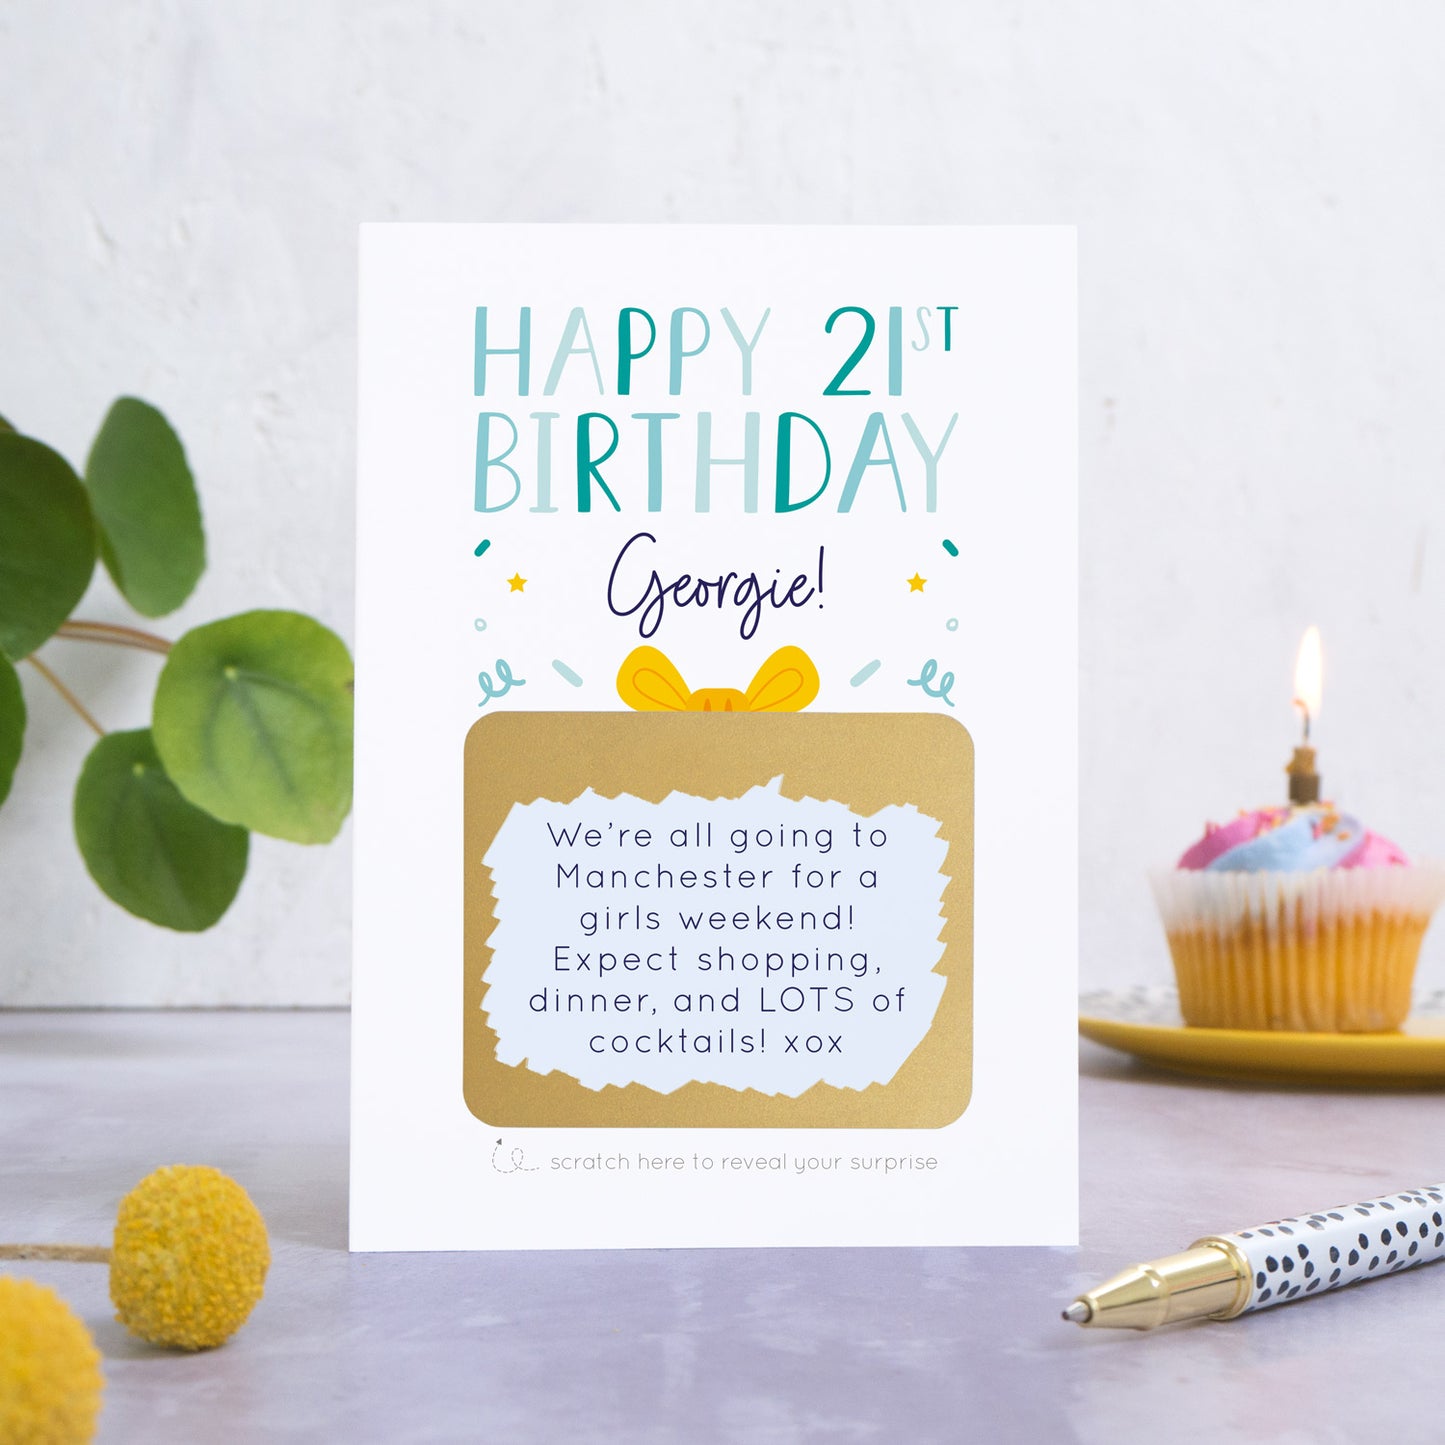 A personalised happy 21st birthday scratch card in blue that has been photographed on a white and grey background. There is foliage and yellow flowers on the left and a cupcake and a pen to the right. The card features the recipients name and a scratch panel that has been scratched off revealing a personalised message.